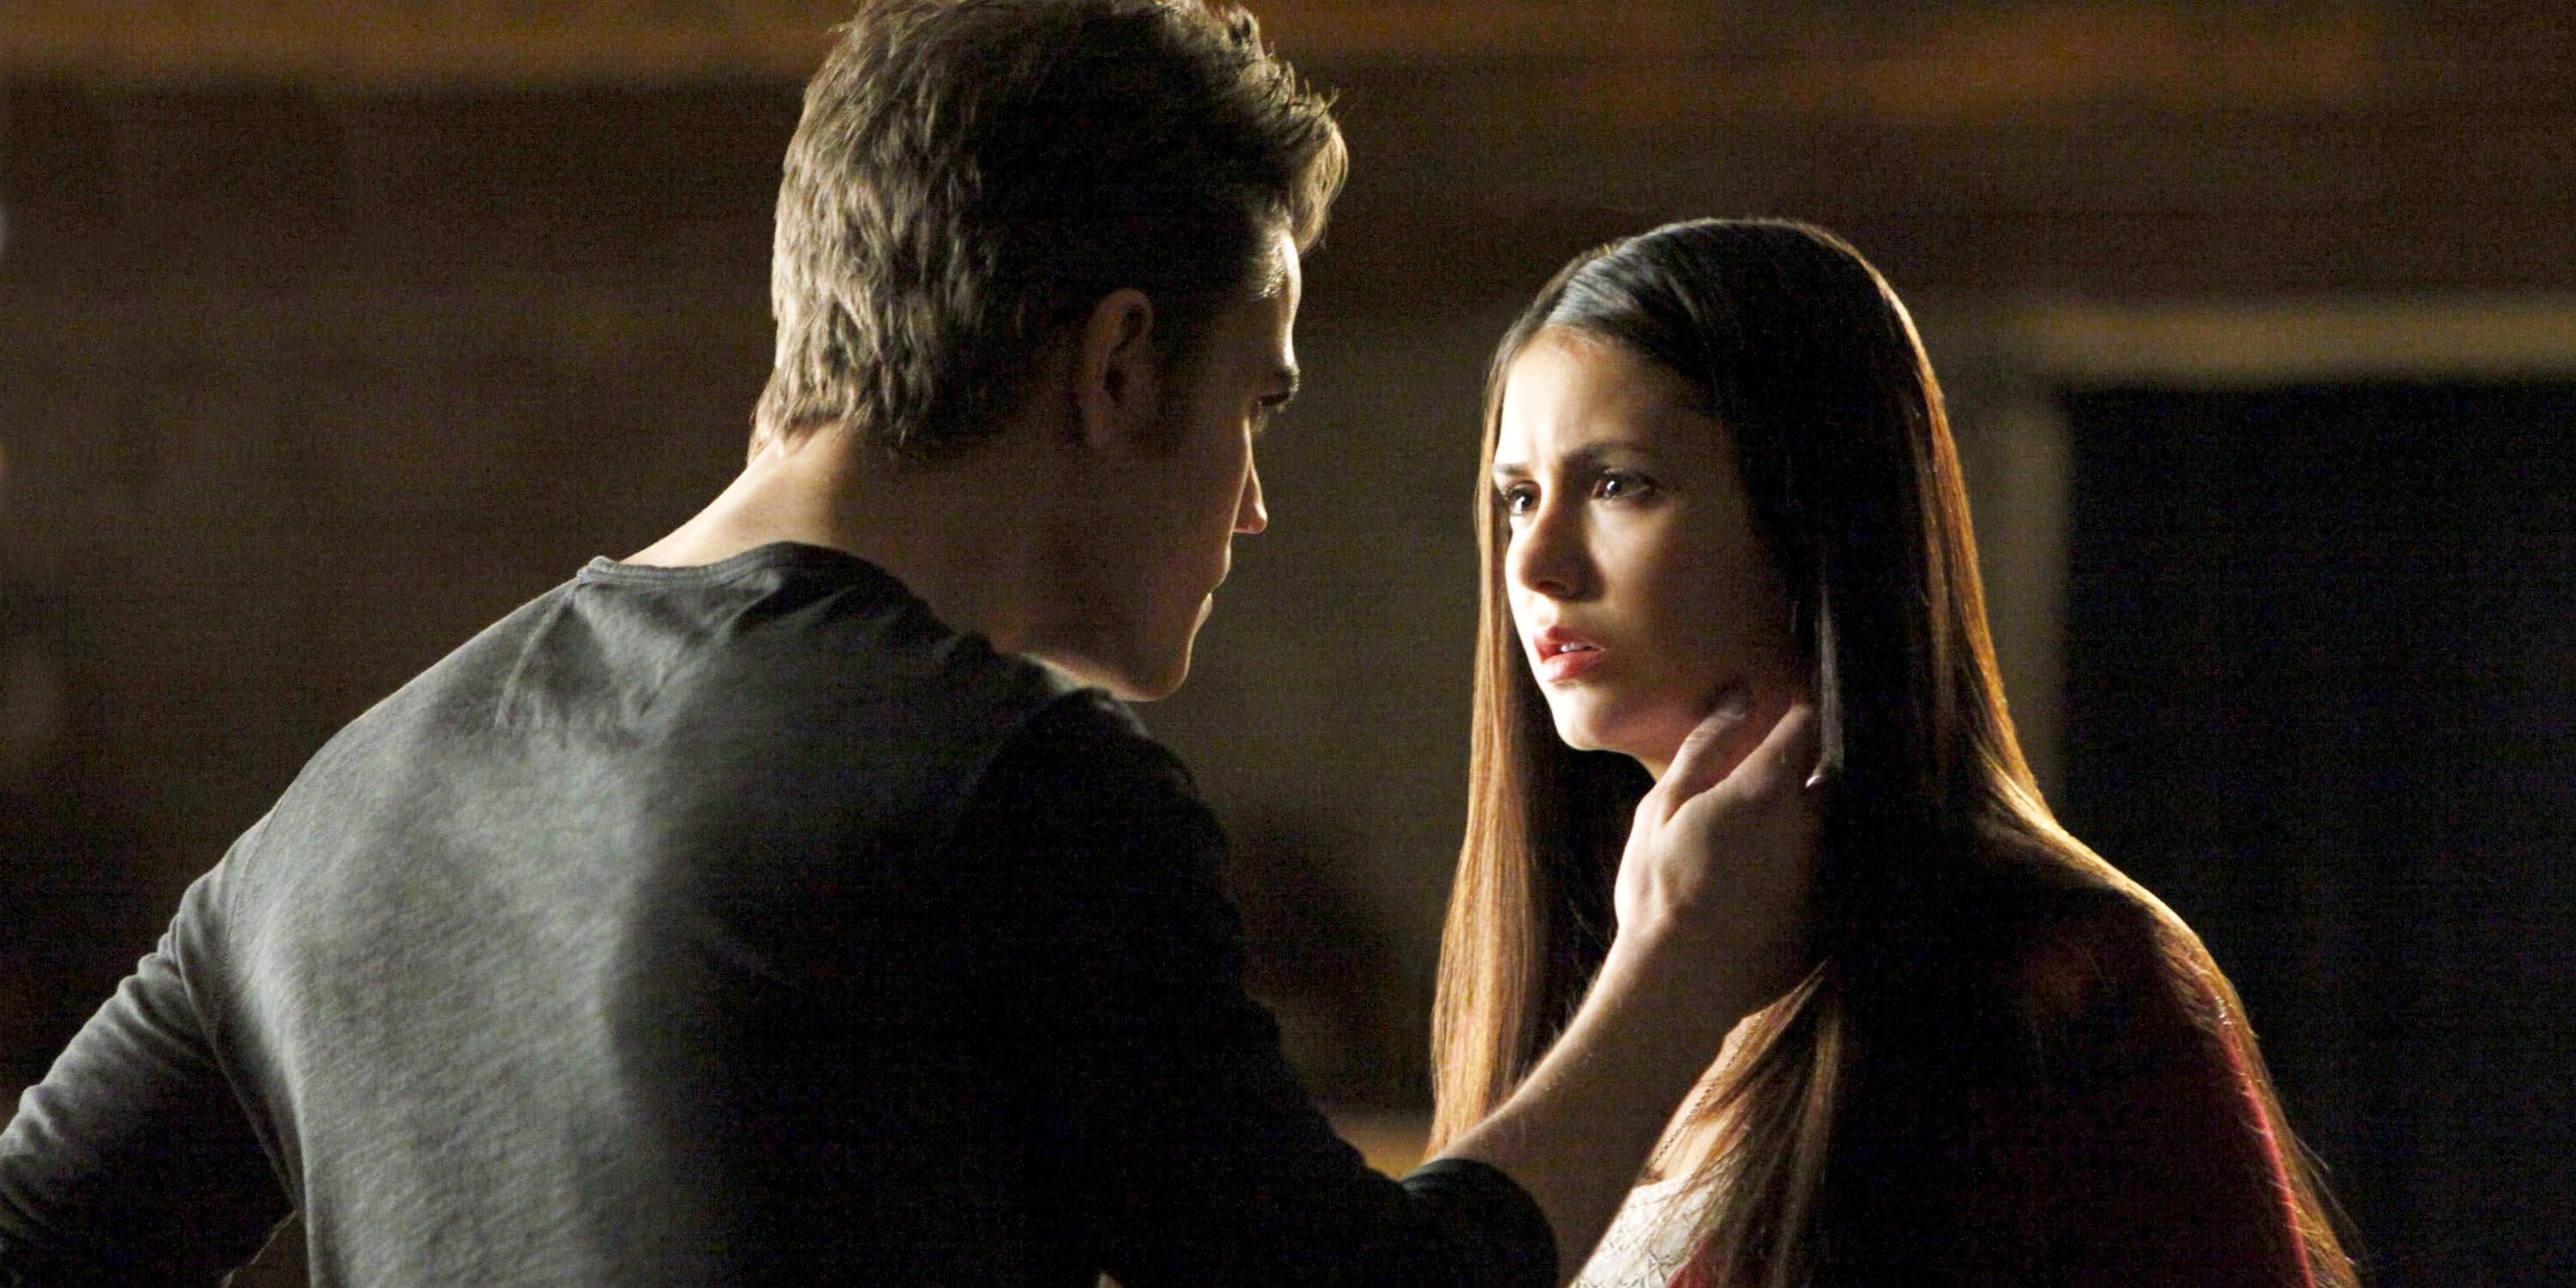 Stefan Reaching Out To Elena